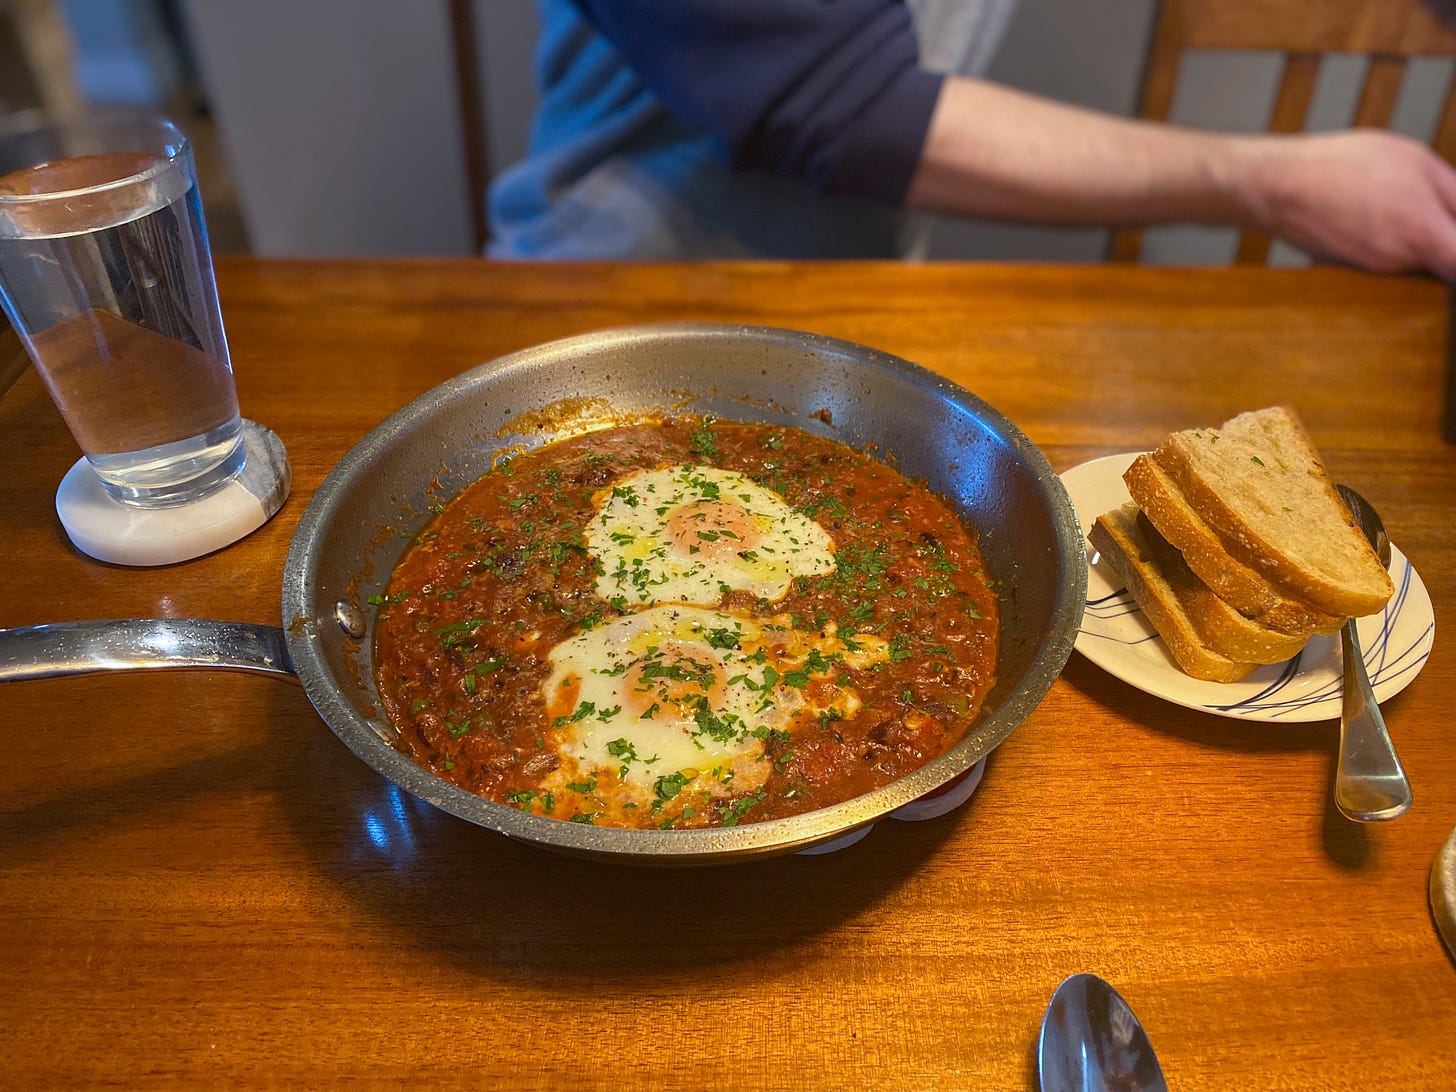 A table set with a stainless steel frying pan full of puttanesca, and topped with two poached eggs, parmesan, and parsley. Next to the pan is a small plate with slices of toast. Jeff sits across the table in the background.